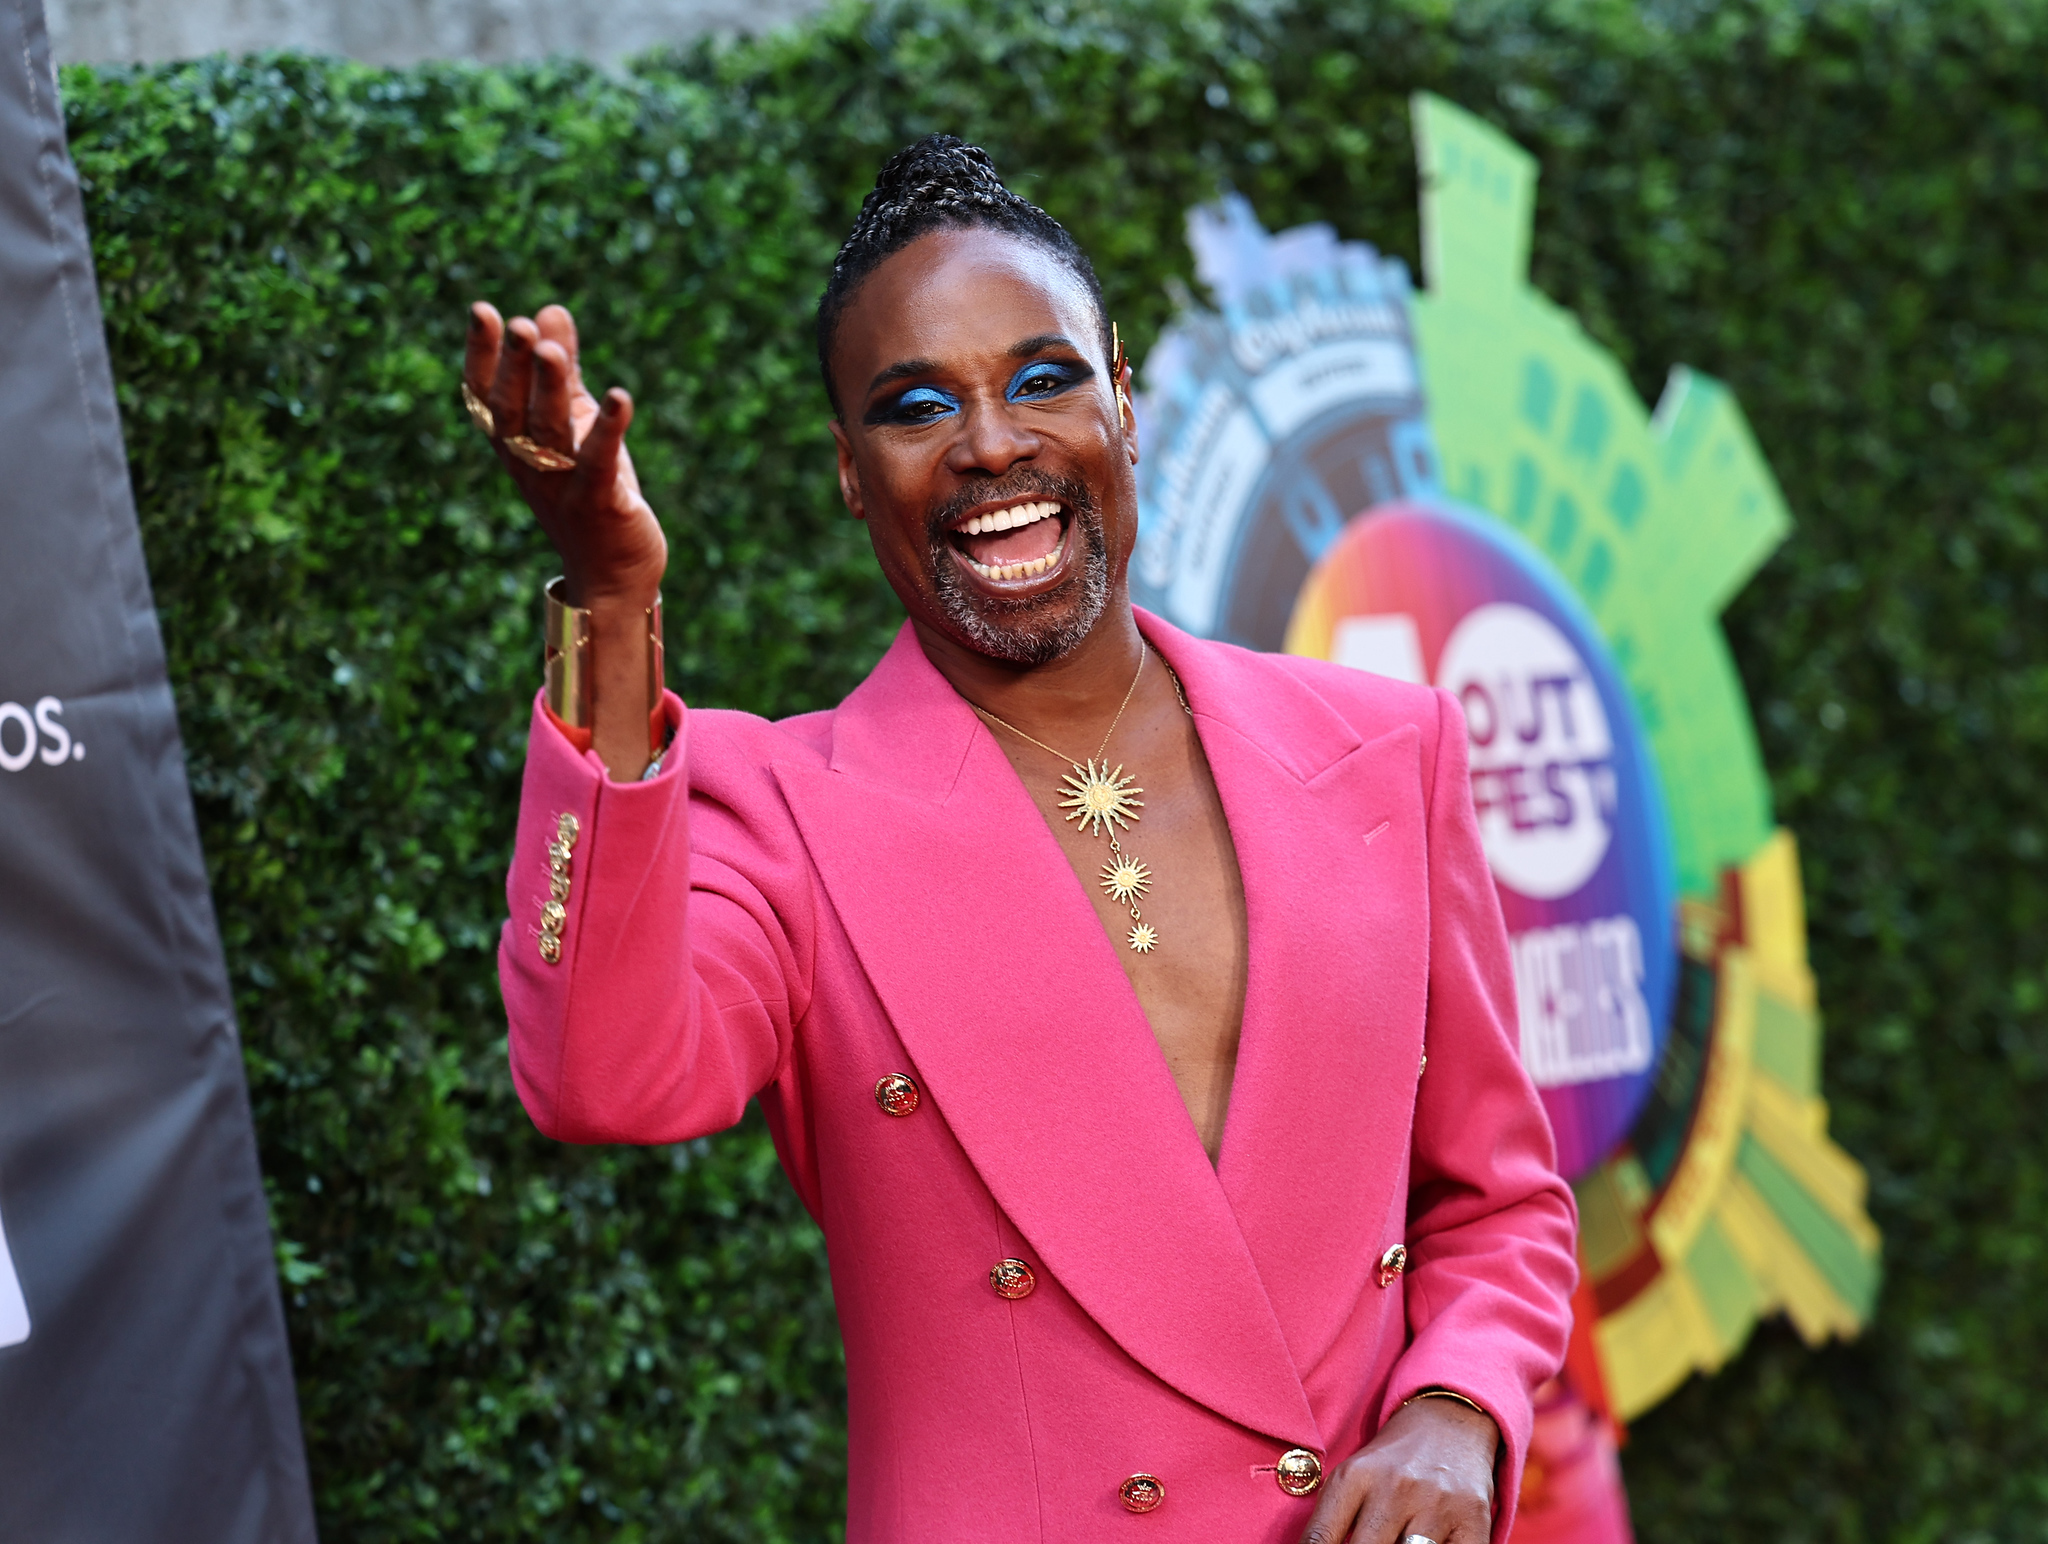 Billy Porter at Outfest Los Angeles LGBTQ Film Festival's opening night gala (Shutterstock for Outfest)